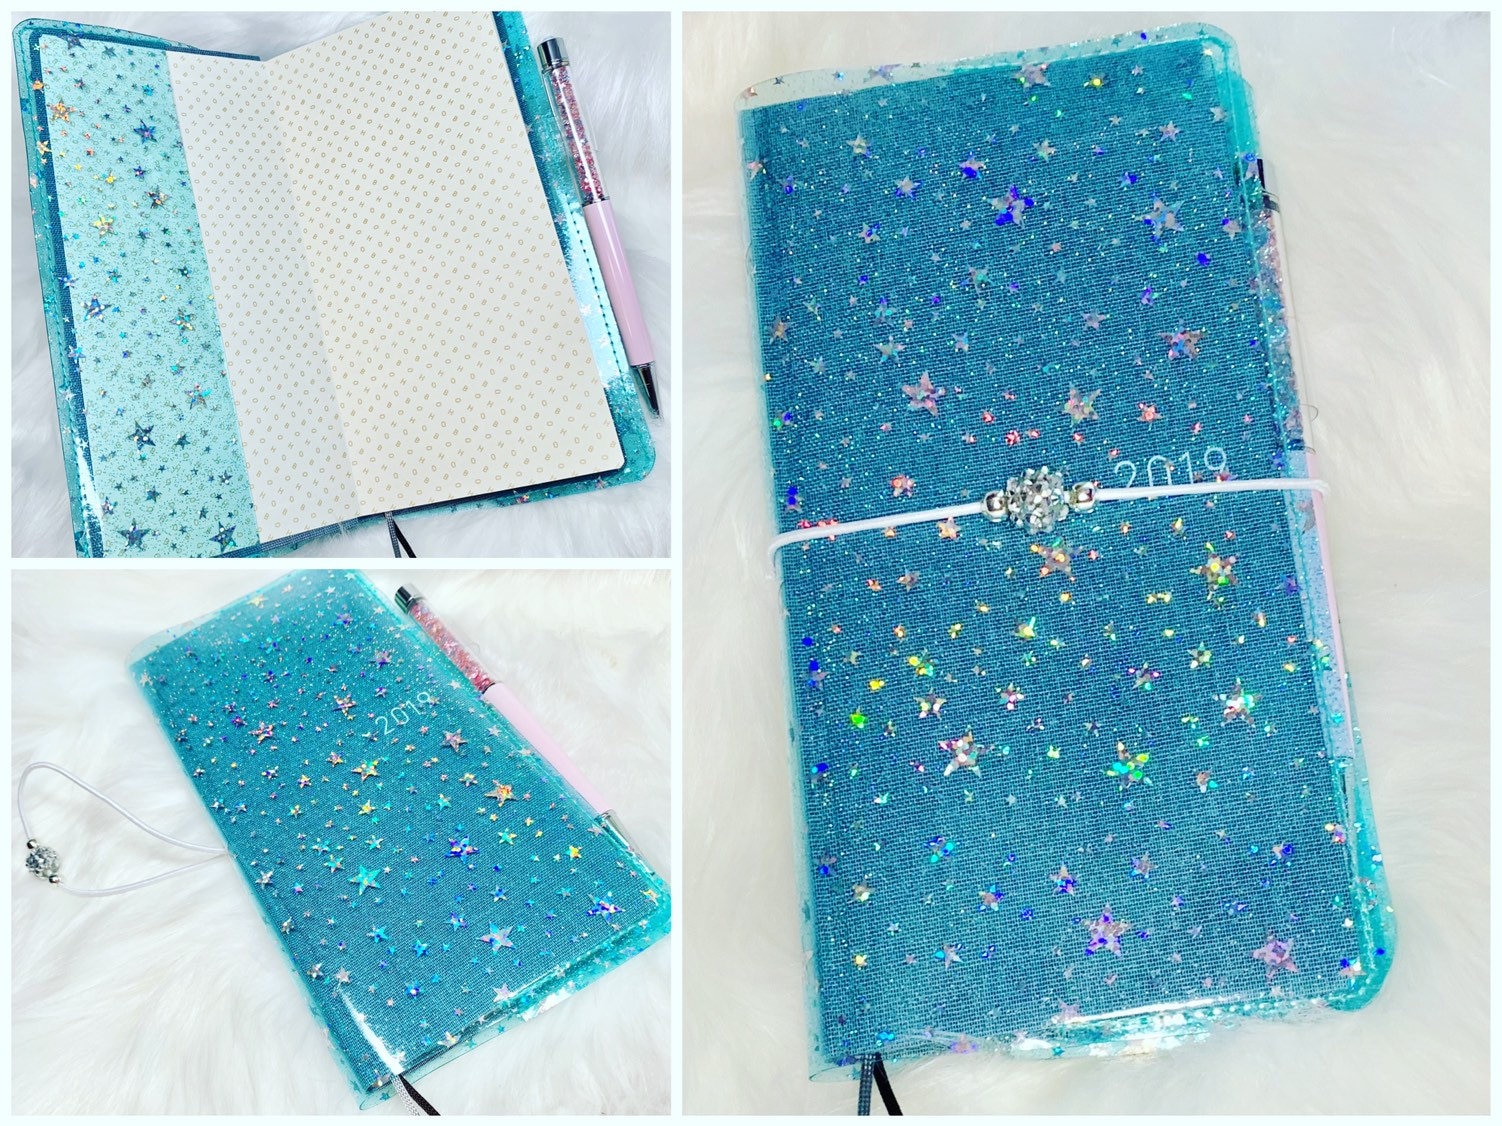 Hobonichi Weeks Clear Cover Jelly Cover Hobo Cover Graduation Gift CC89 